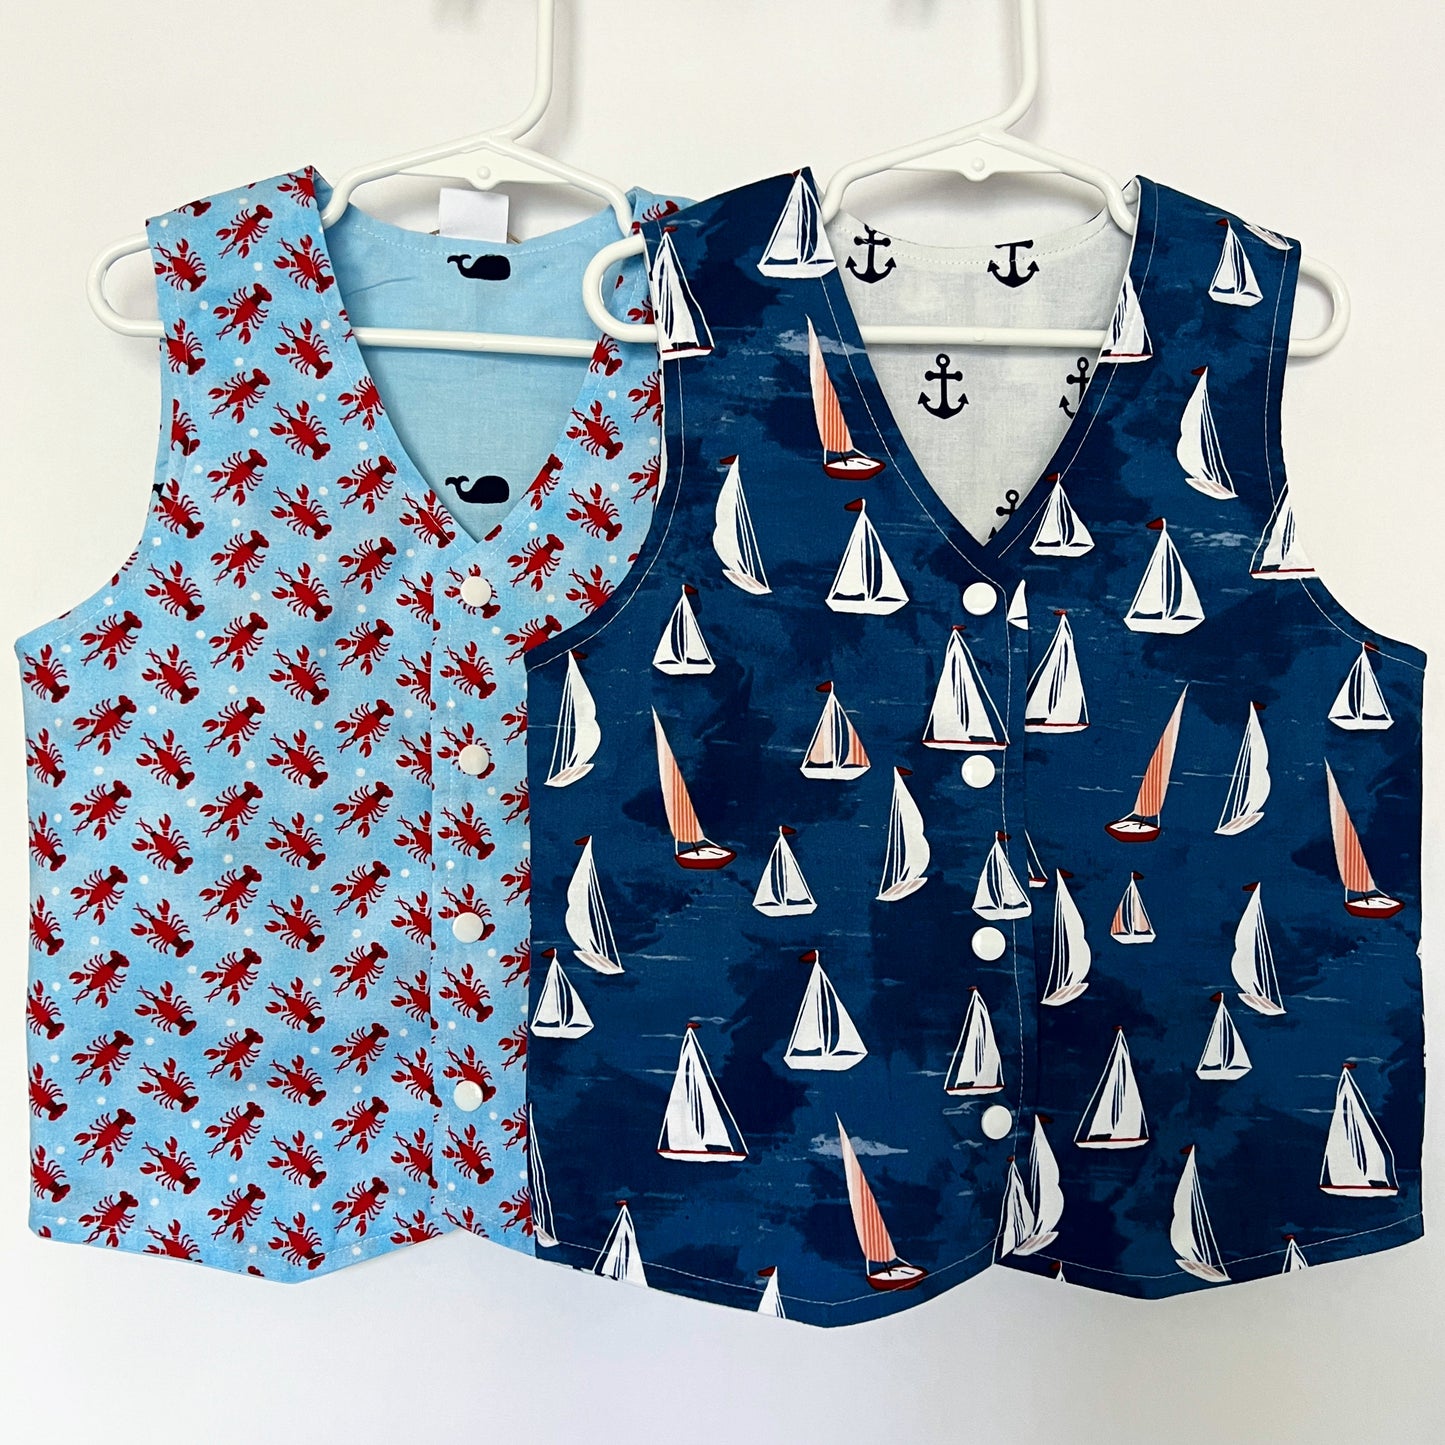 Kids reversible vest “Boats and Anchors”